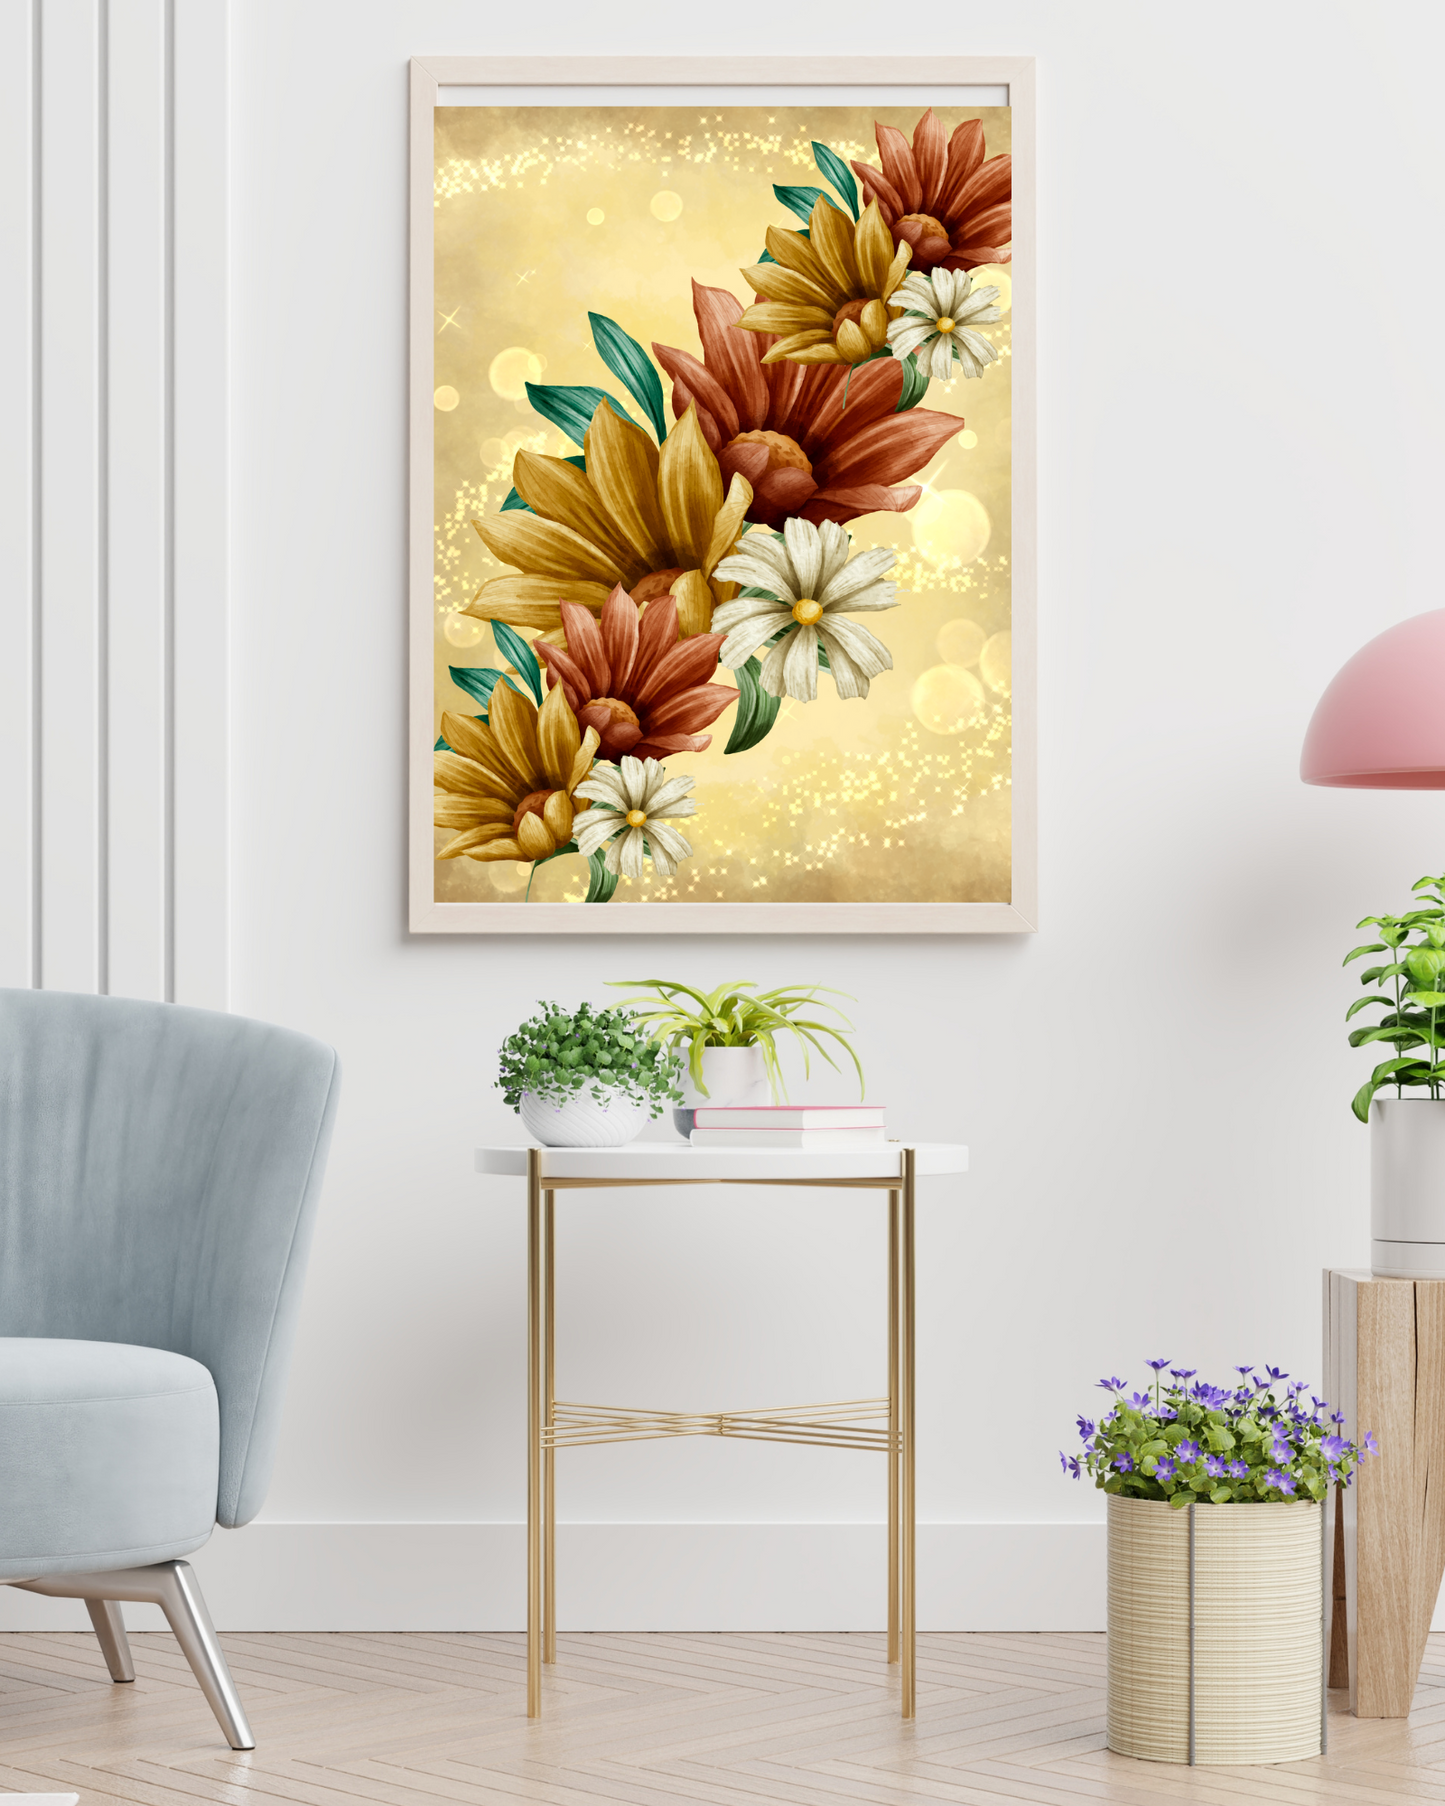 Glamour Gold Wall Decor, Gold Flowers Art, Gold Flowers Printable Art, Wall Decor, Office Decor, Room Decor, Printable Wall Art, Printable Art, Instant Download, Hanging Wall Art, High Quality Art, High Quality Printable